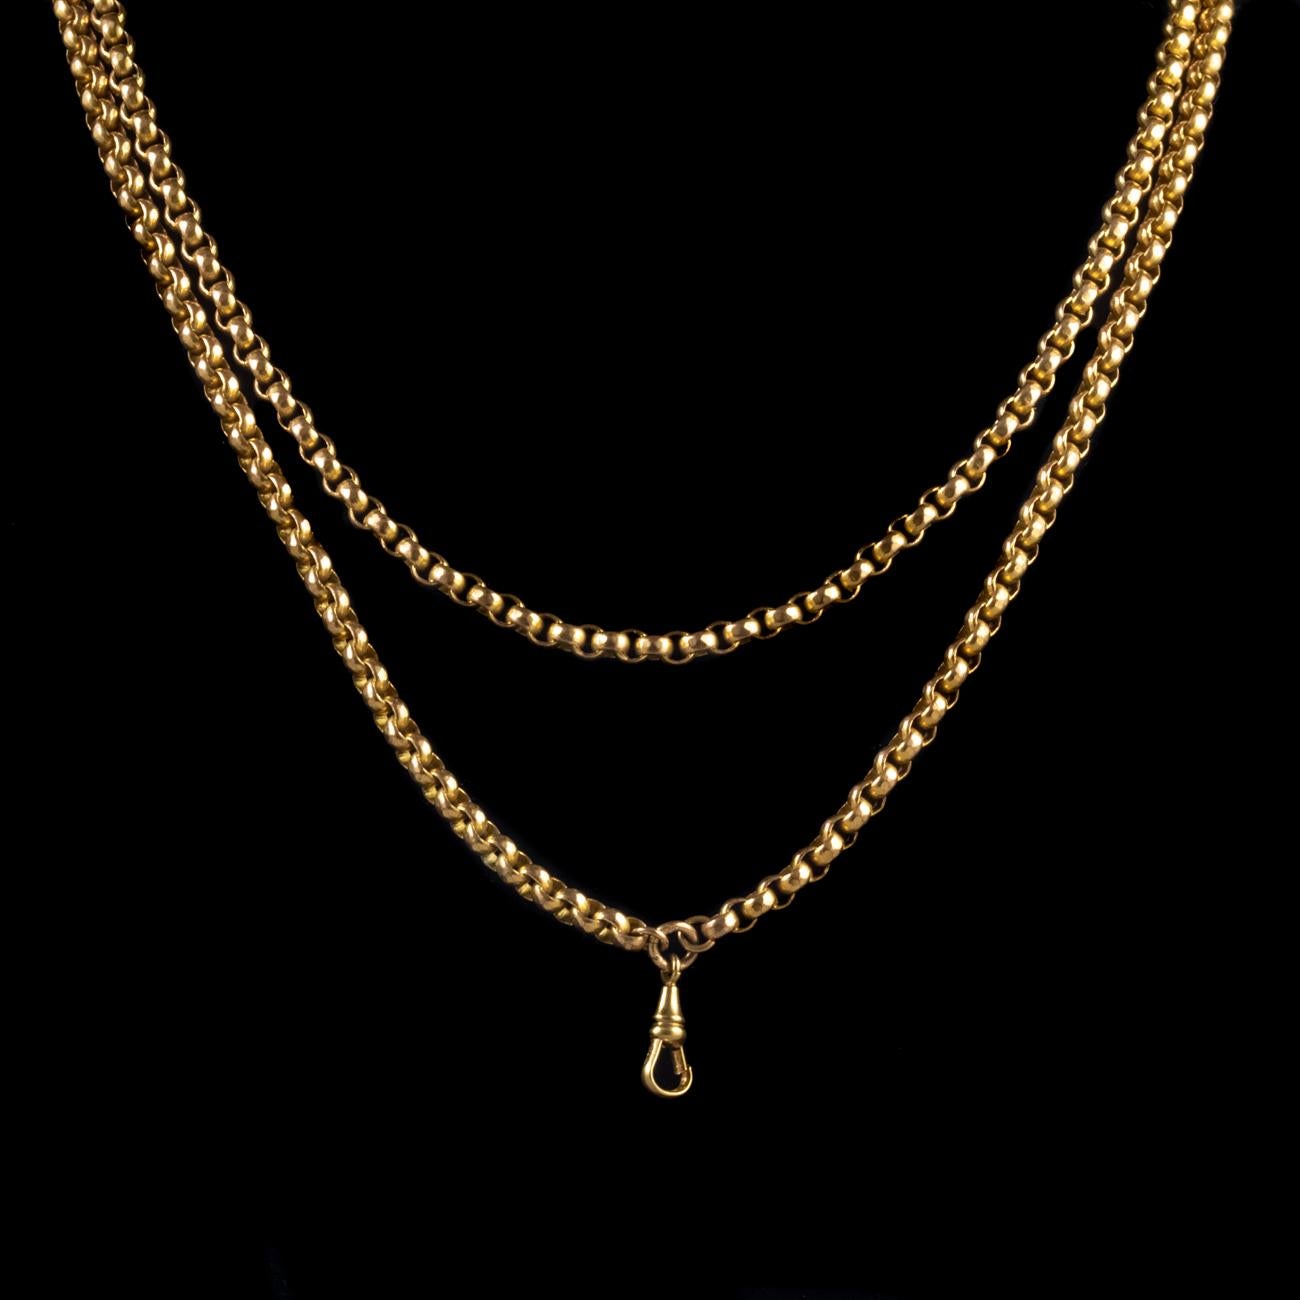 A fabulous Antique Victorian long guard chain modelled in Silver gilded in 18ct Yellow Gold, featuring beautifully crafted faceted links.

The chain is complete with a large trigger clasp at the end which may have been used to attach a pocket watch